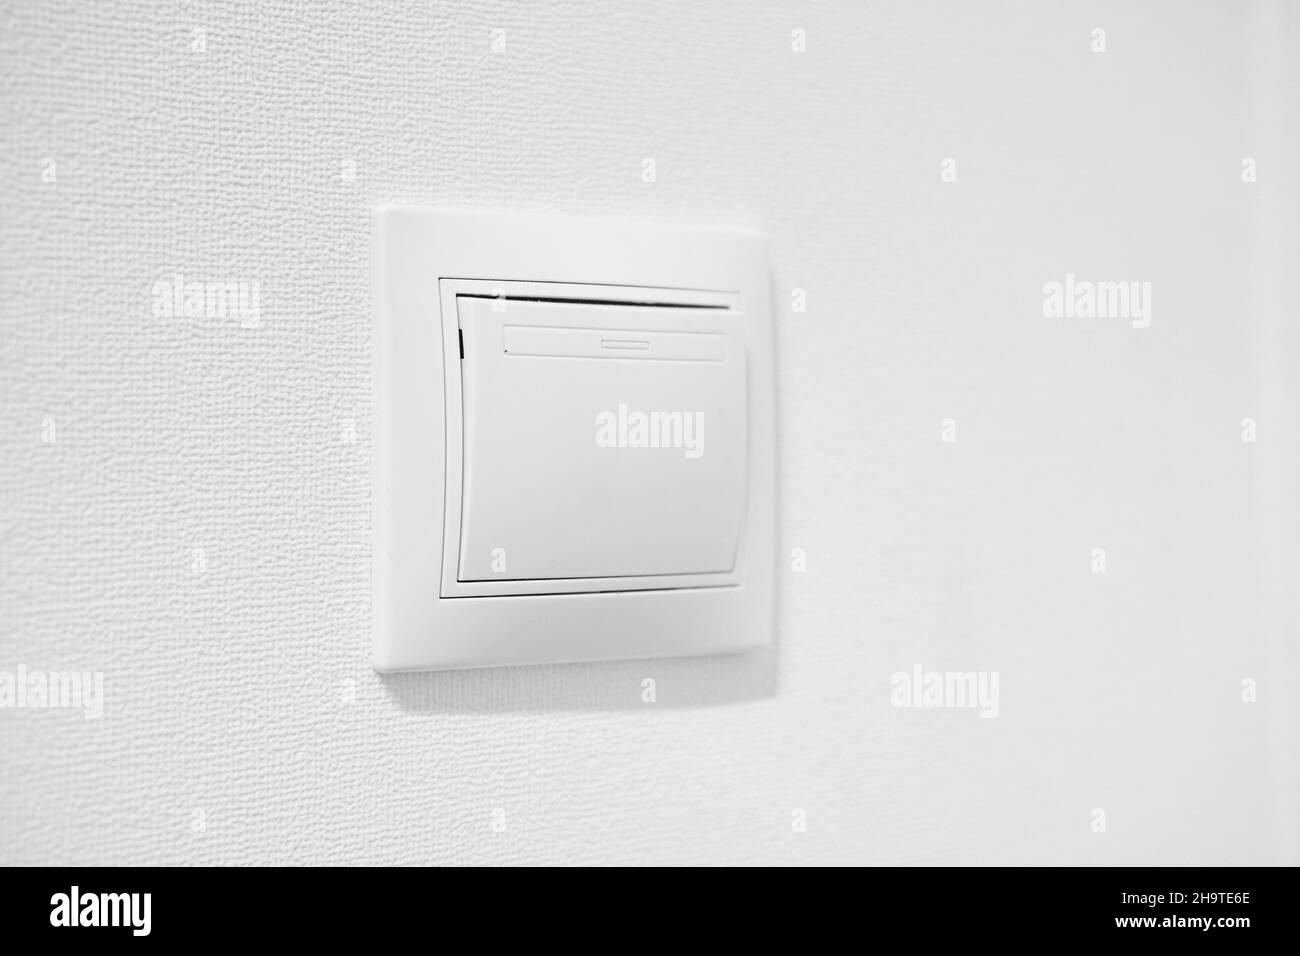 Standart rocker switch for exhaust fan or lighting applications. White common toggle switch in home. Inexpensive plastic push button switch against Stock Photo